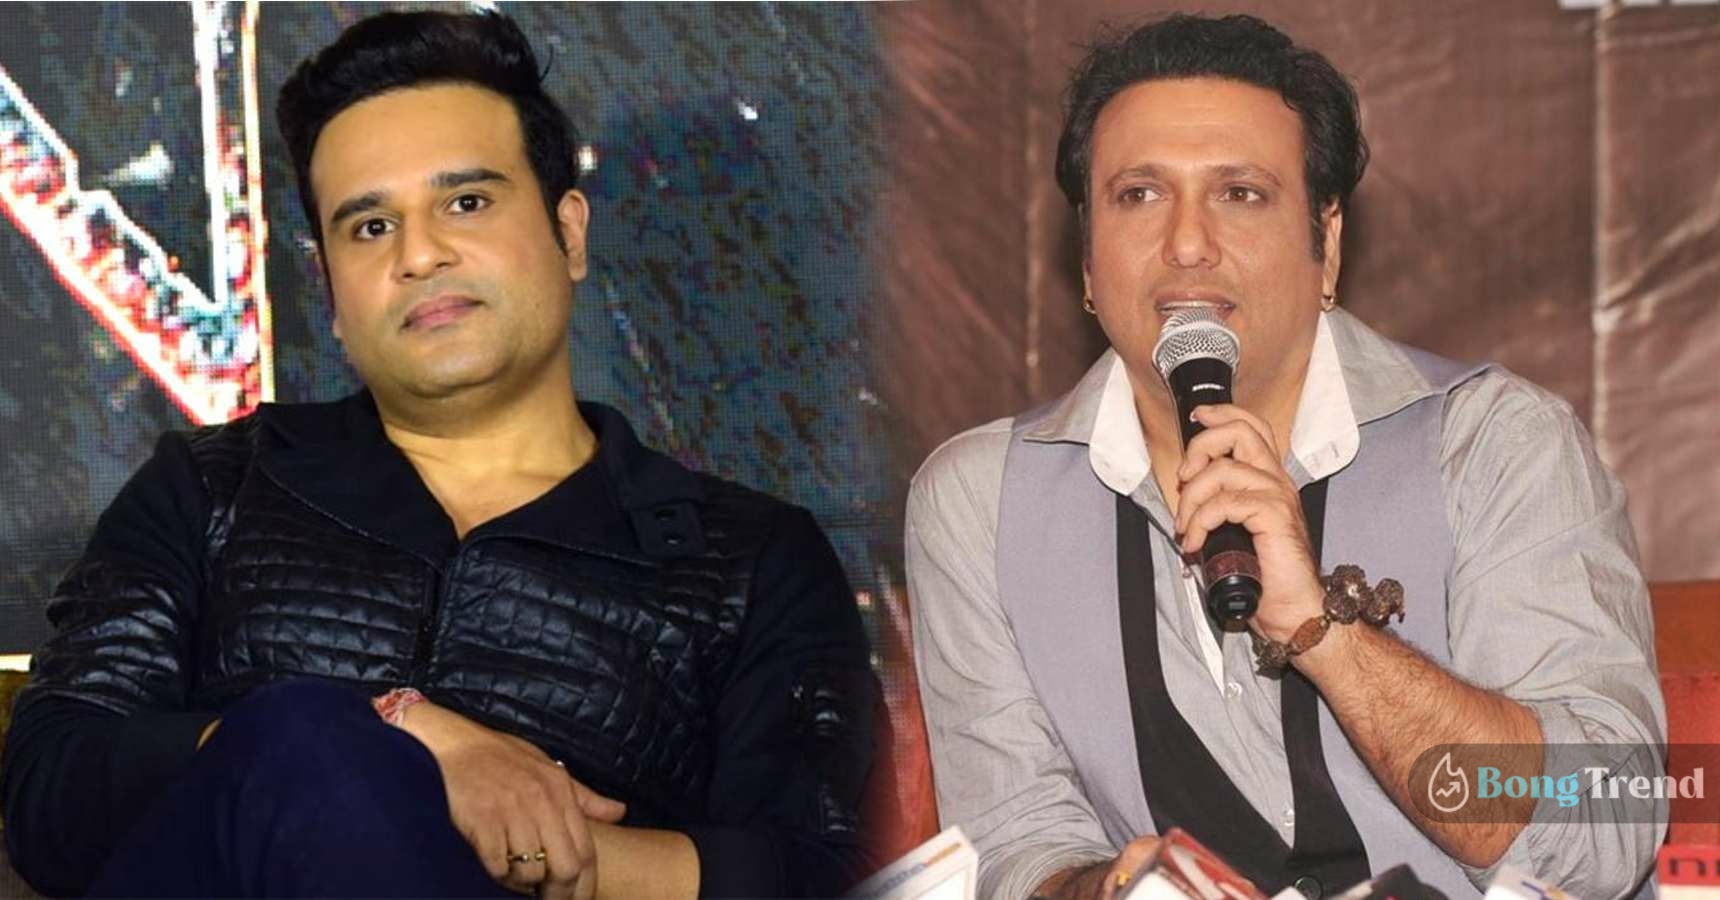 Finaly fight between Govinda and sister's son Krushna resolves